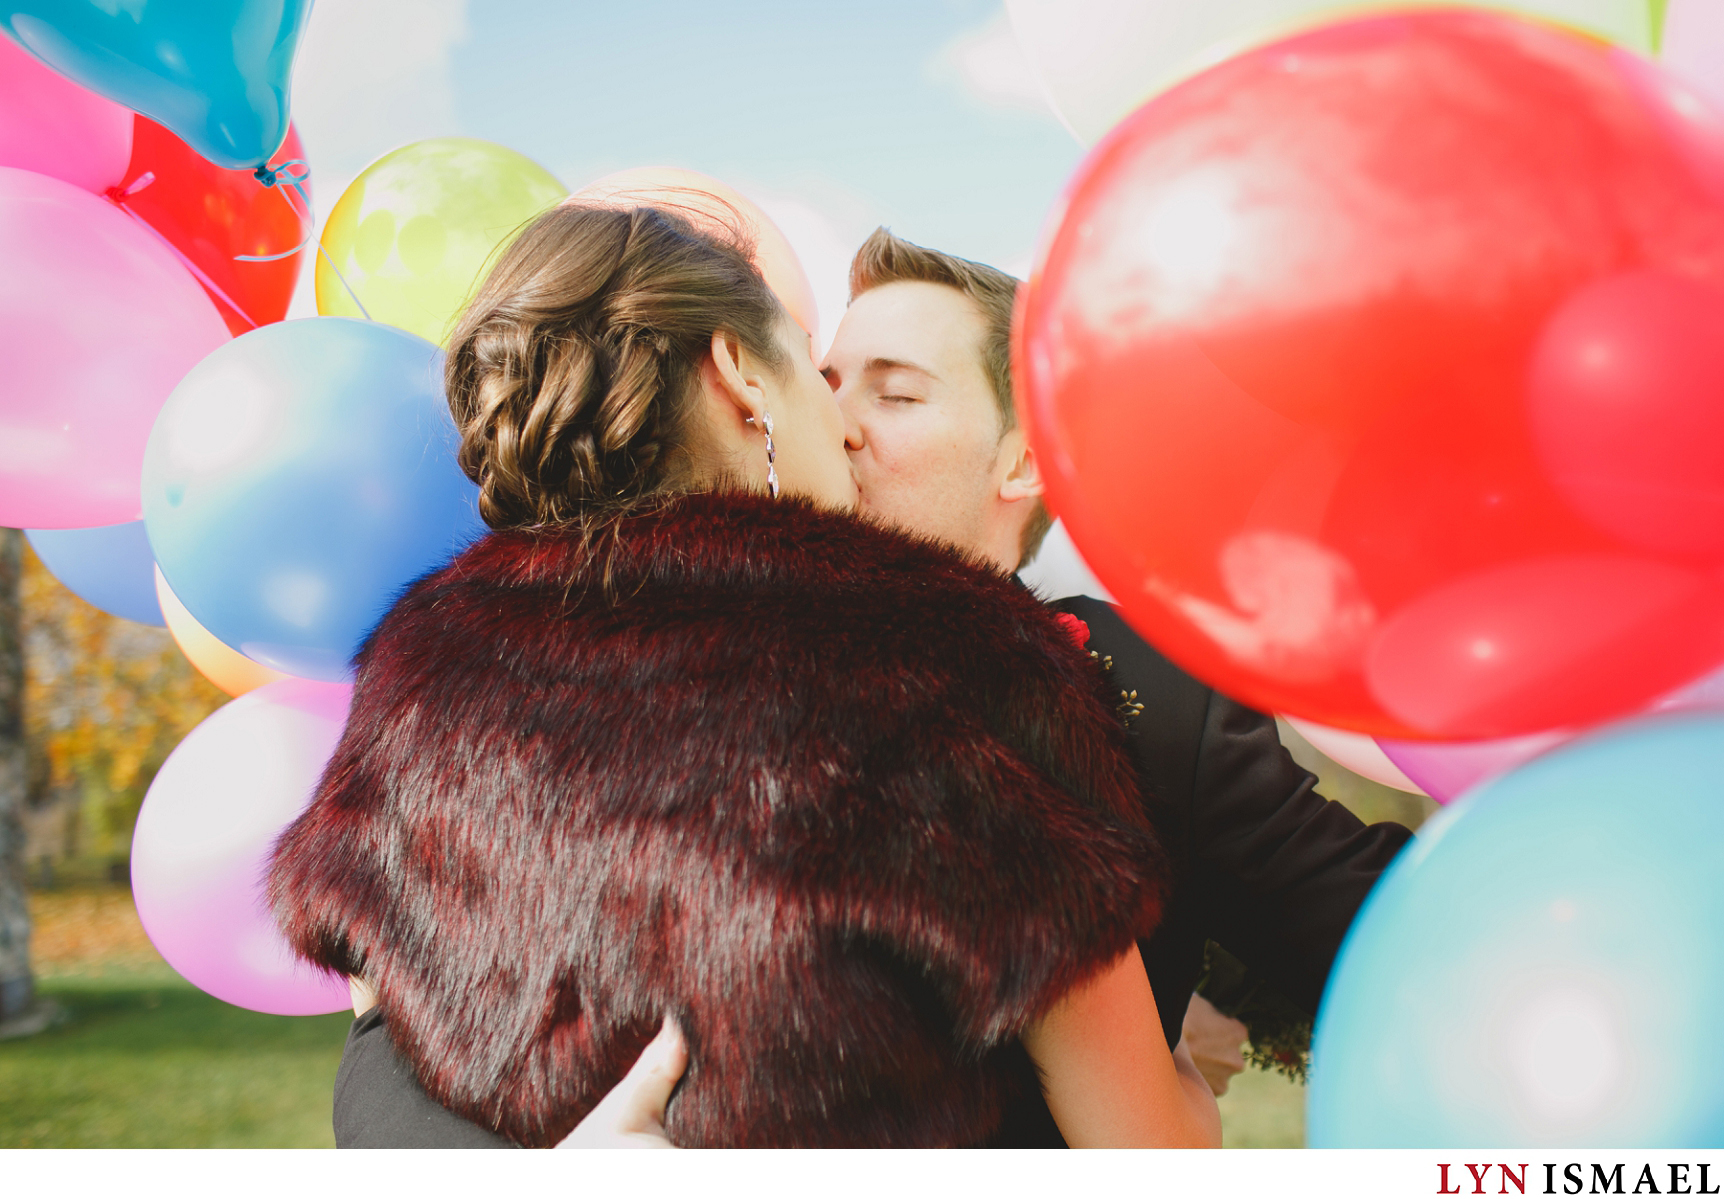 The bride and groom's "Up Themed" First Look with colourful balloons.